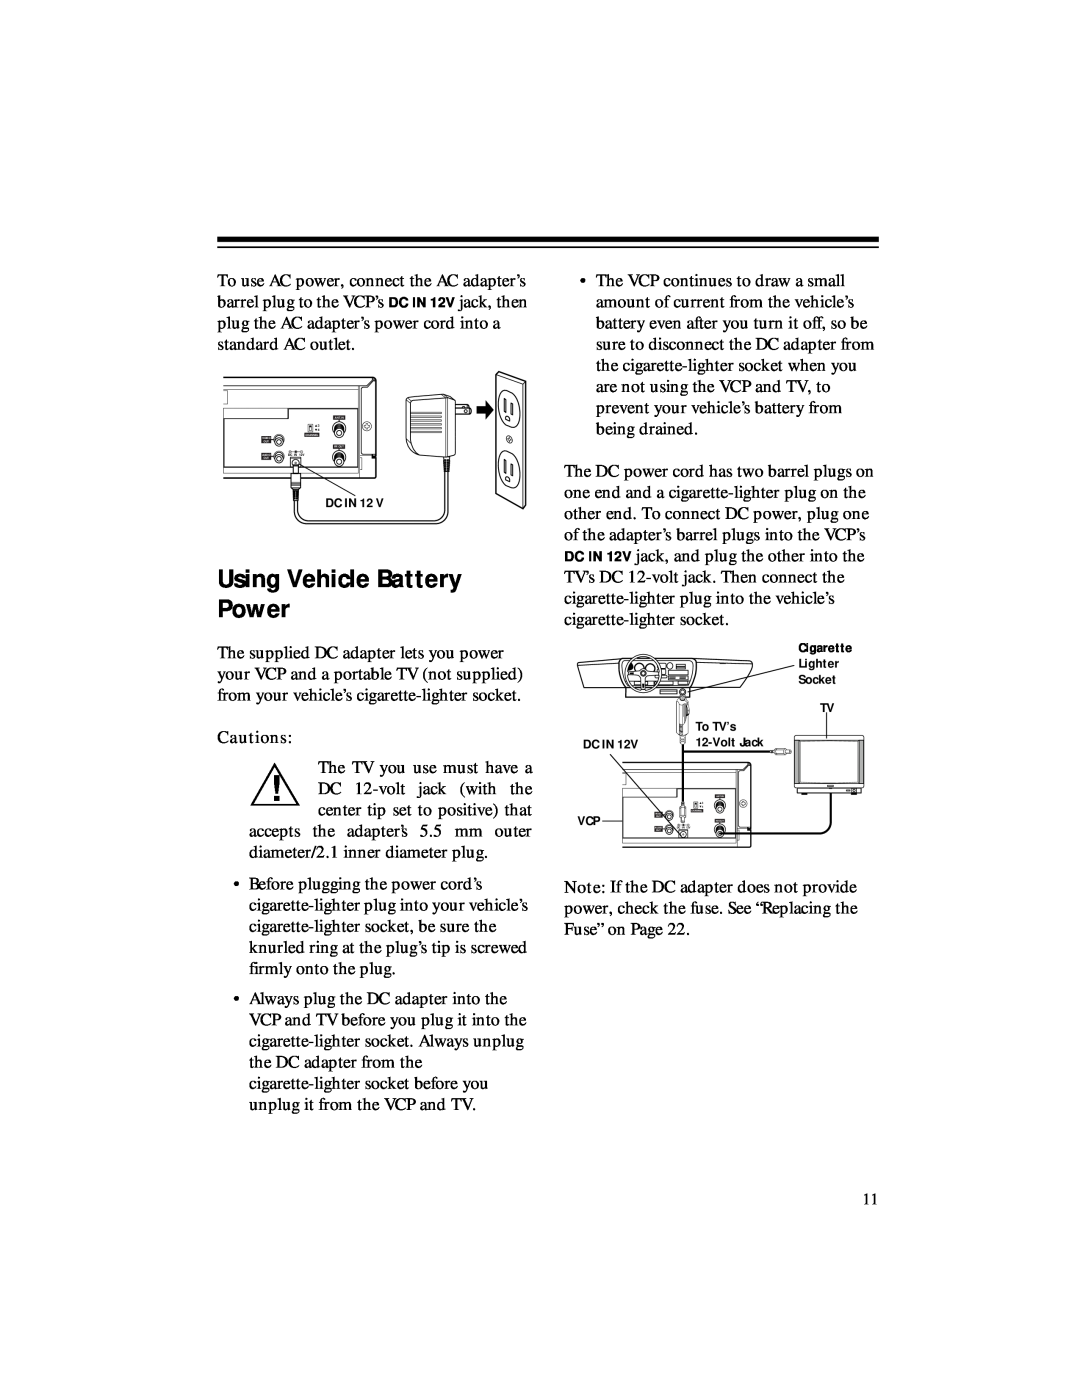 RCA 40, 50 owner manual Using Vehicle Battery Power 